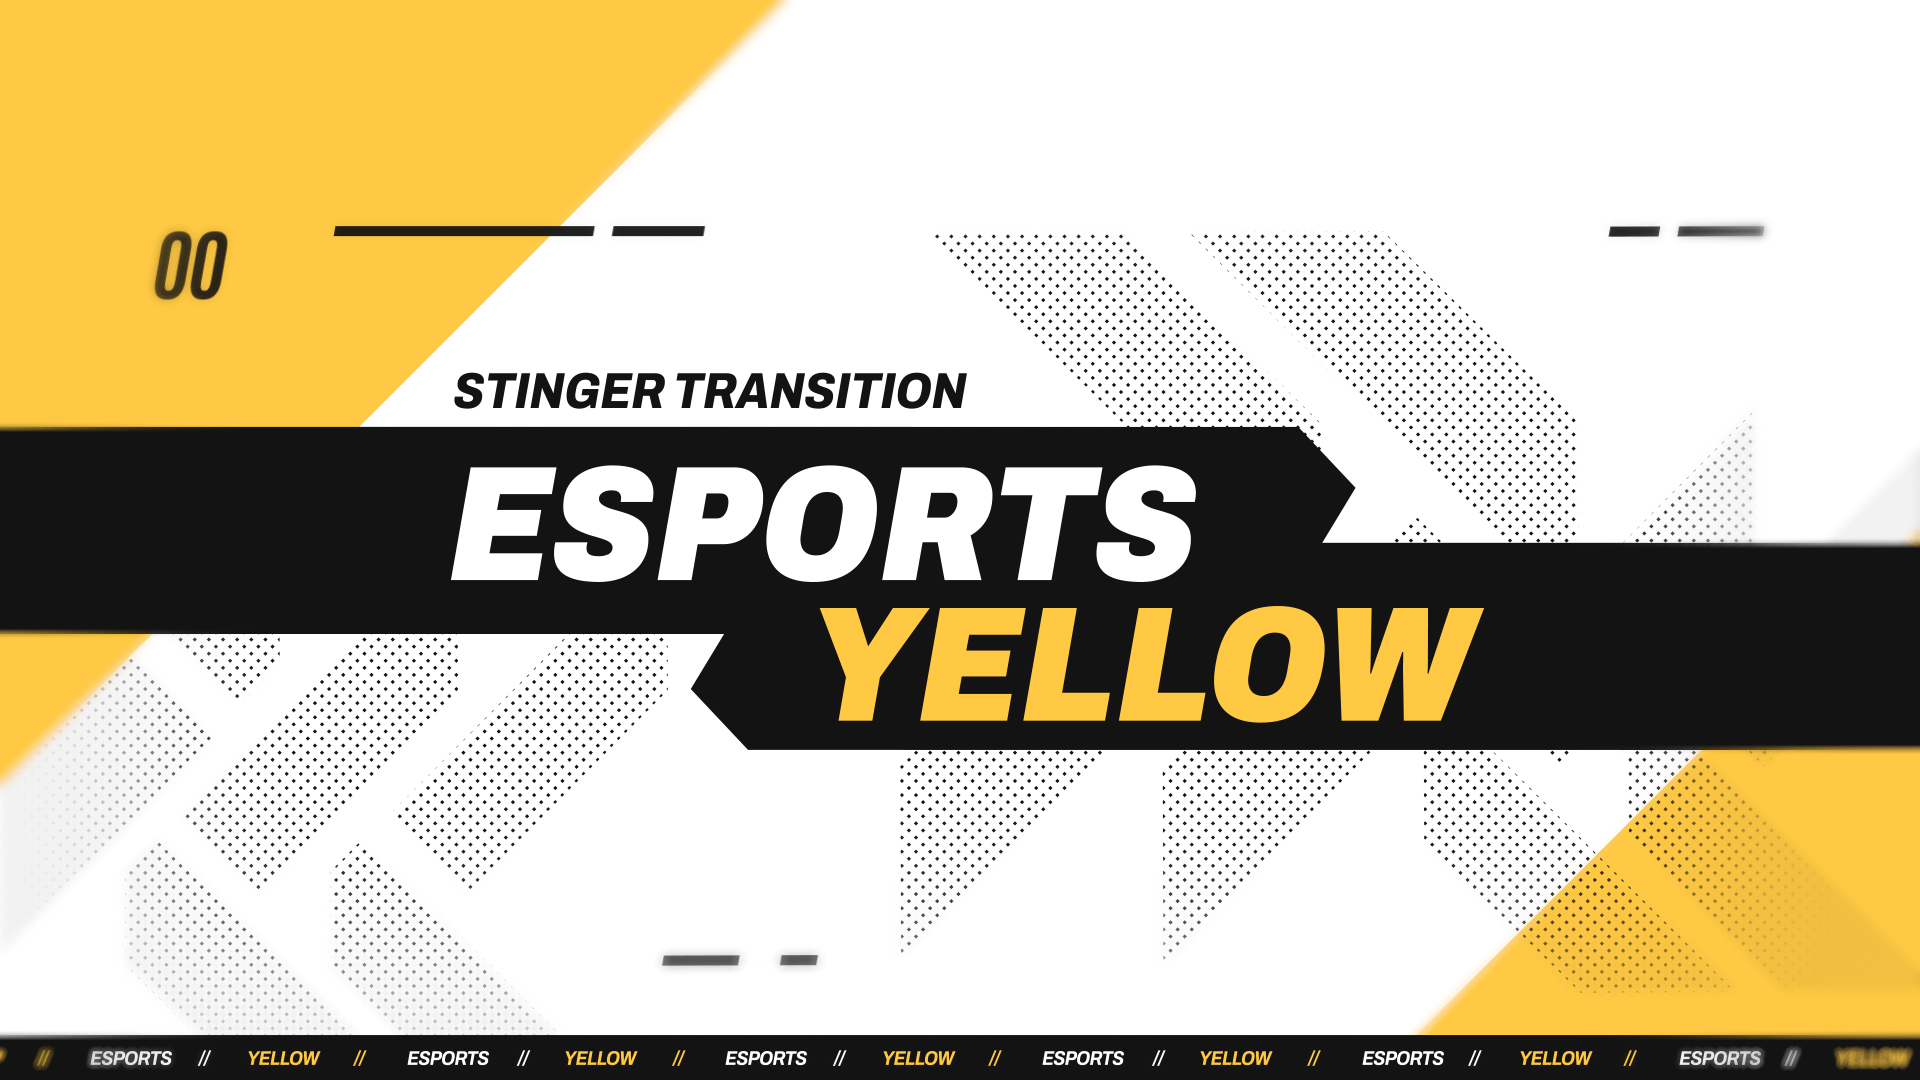 Esports Yellow - Stinger Transition for Twitch, Youtube and Facebook